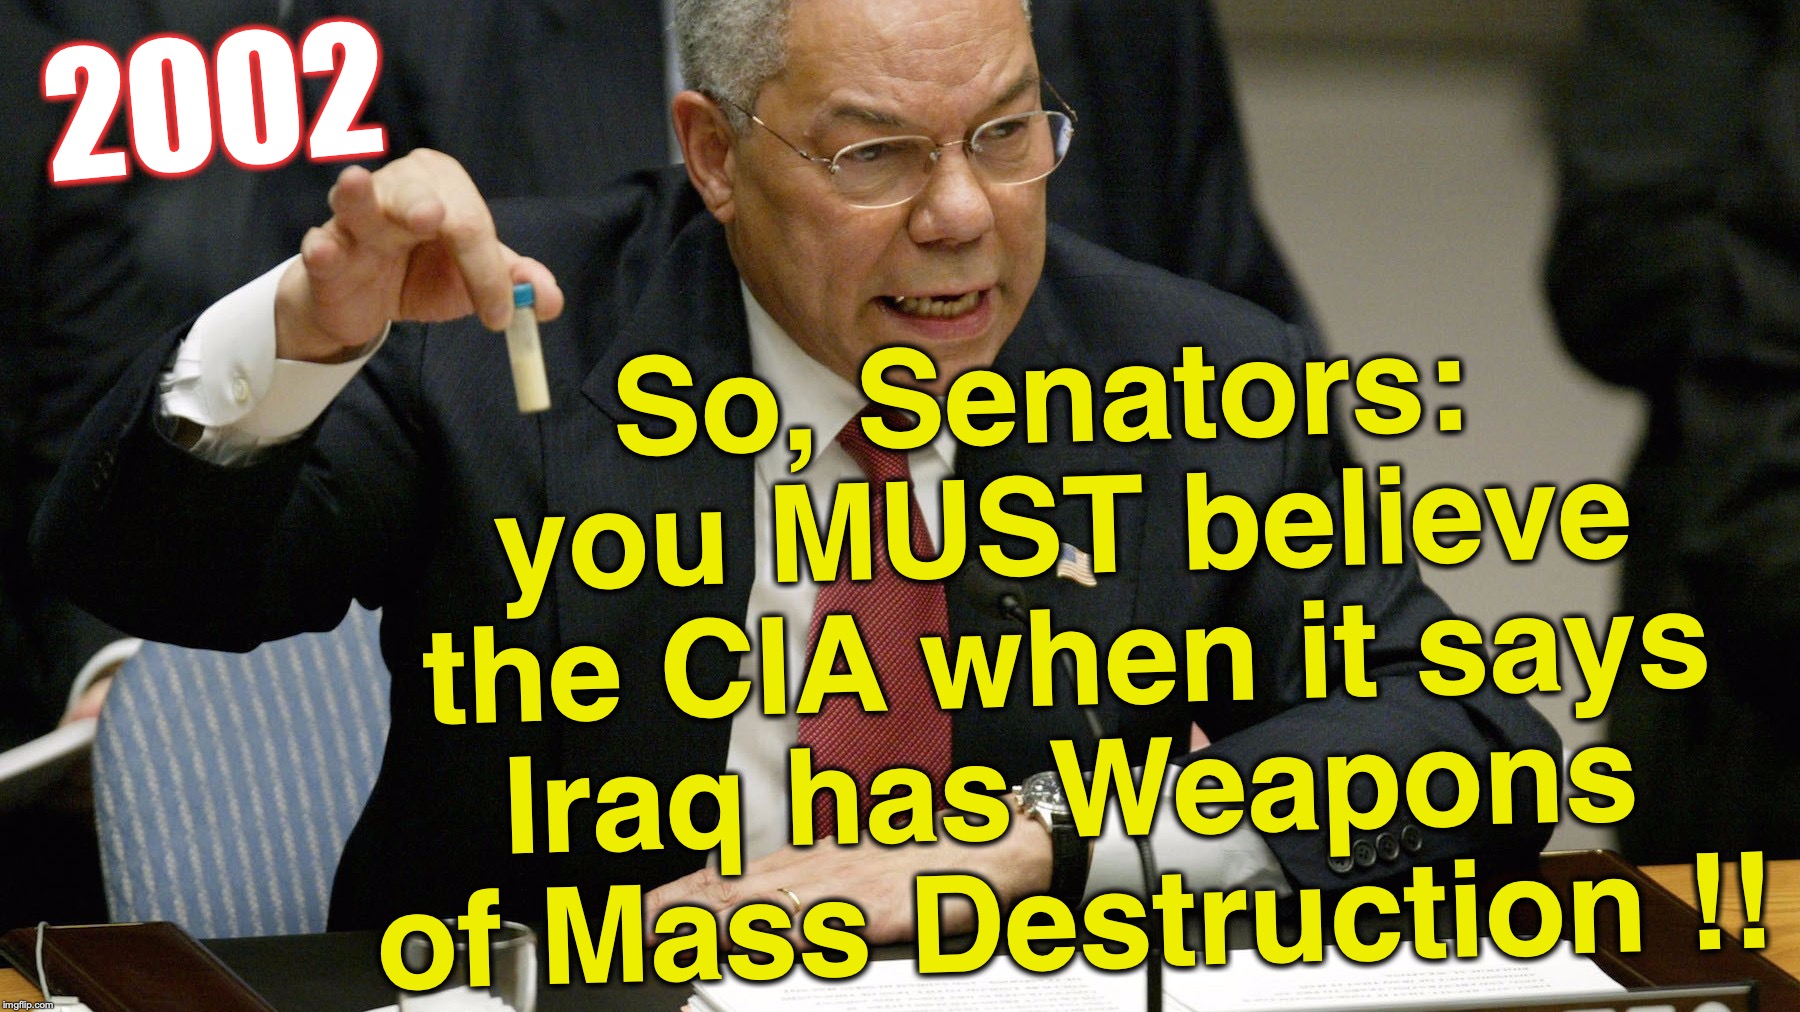 2002 So, Senators: you MUST believe the CIA when it says Iraq has Weapons of Mass Destruction !! | made w/ Imgflip meme maker